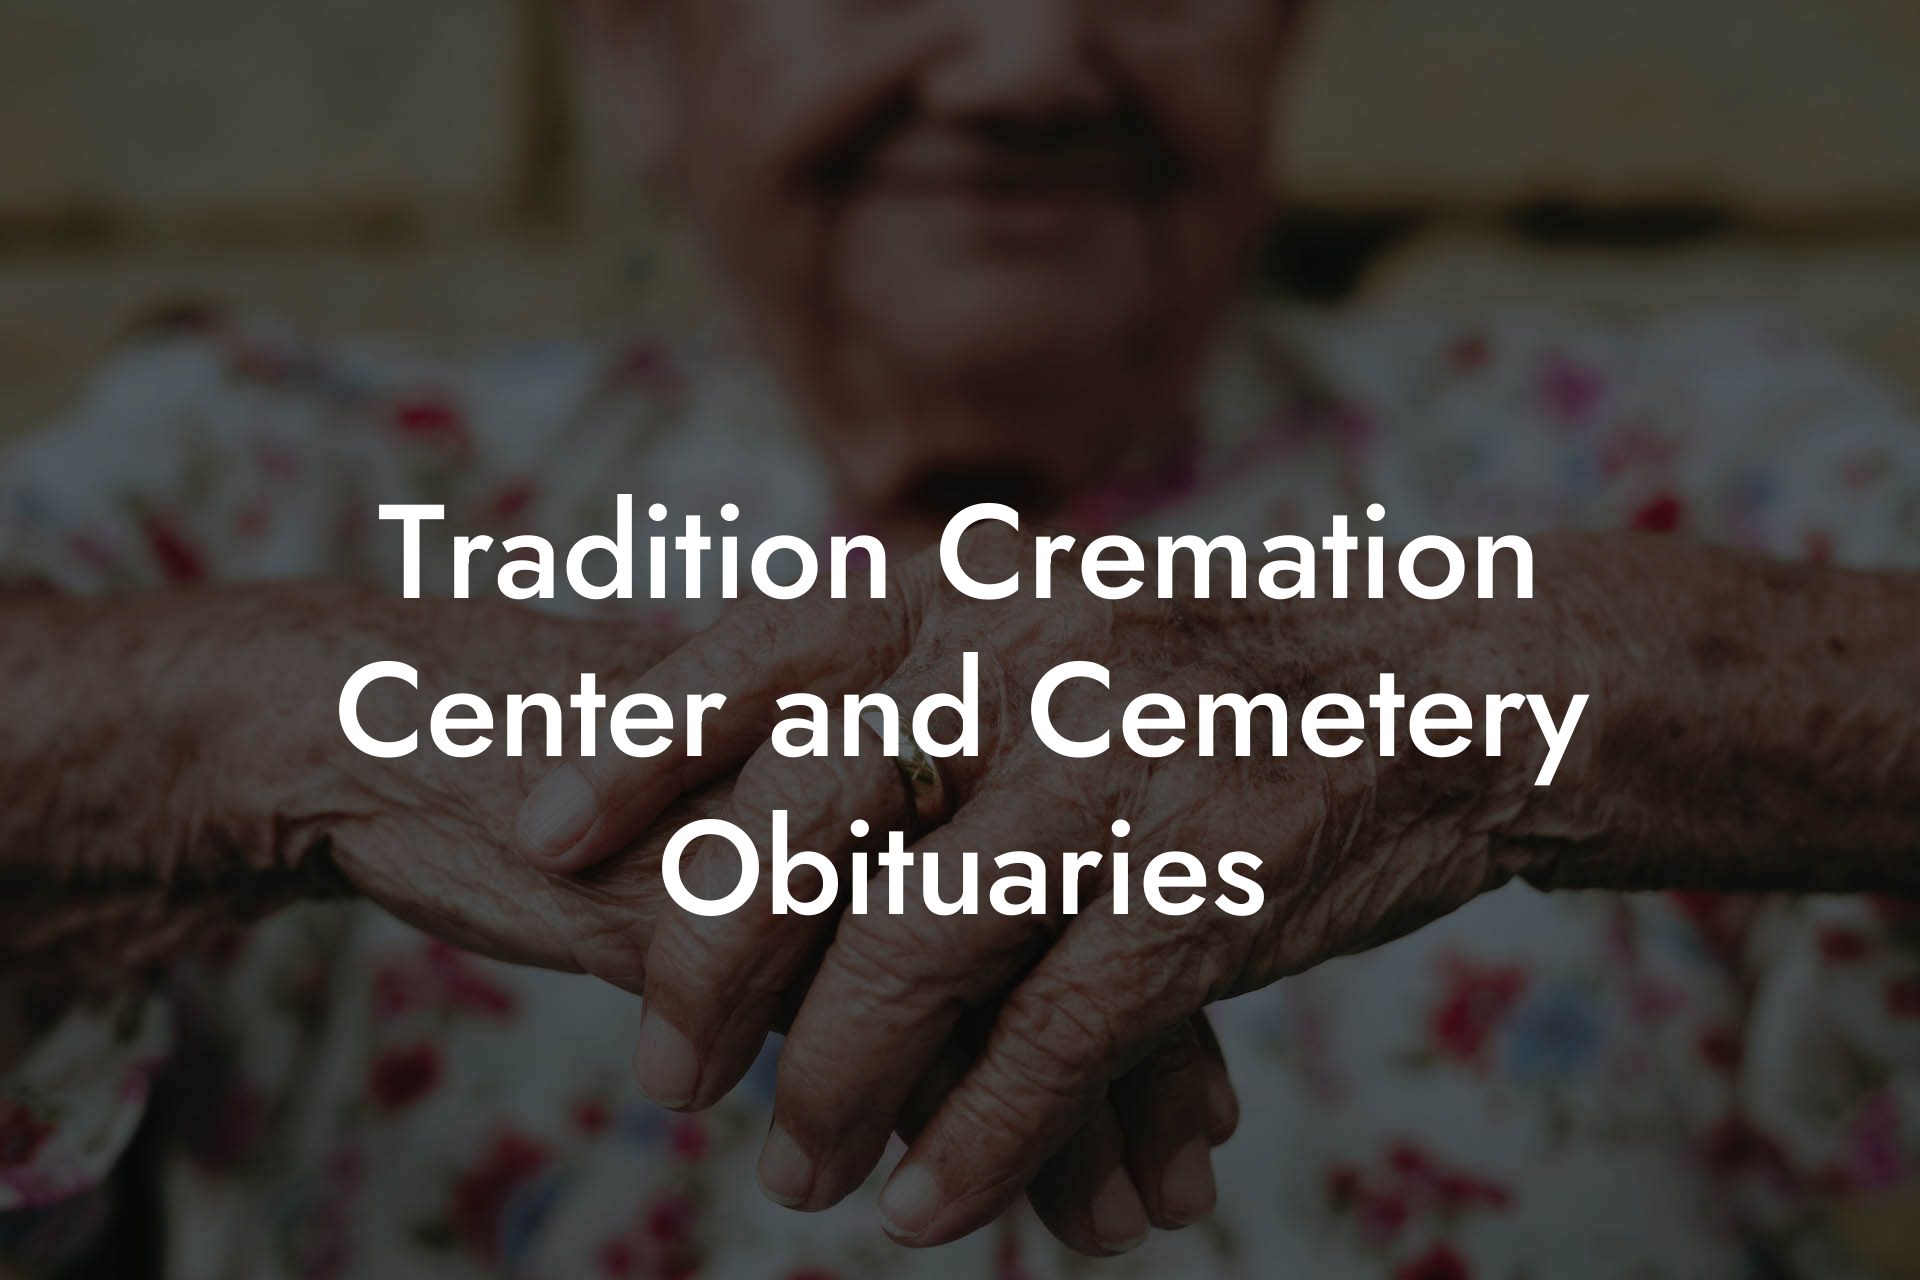 Tradition Cremation Center and Cemetery Obituaries